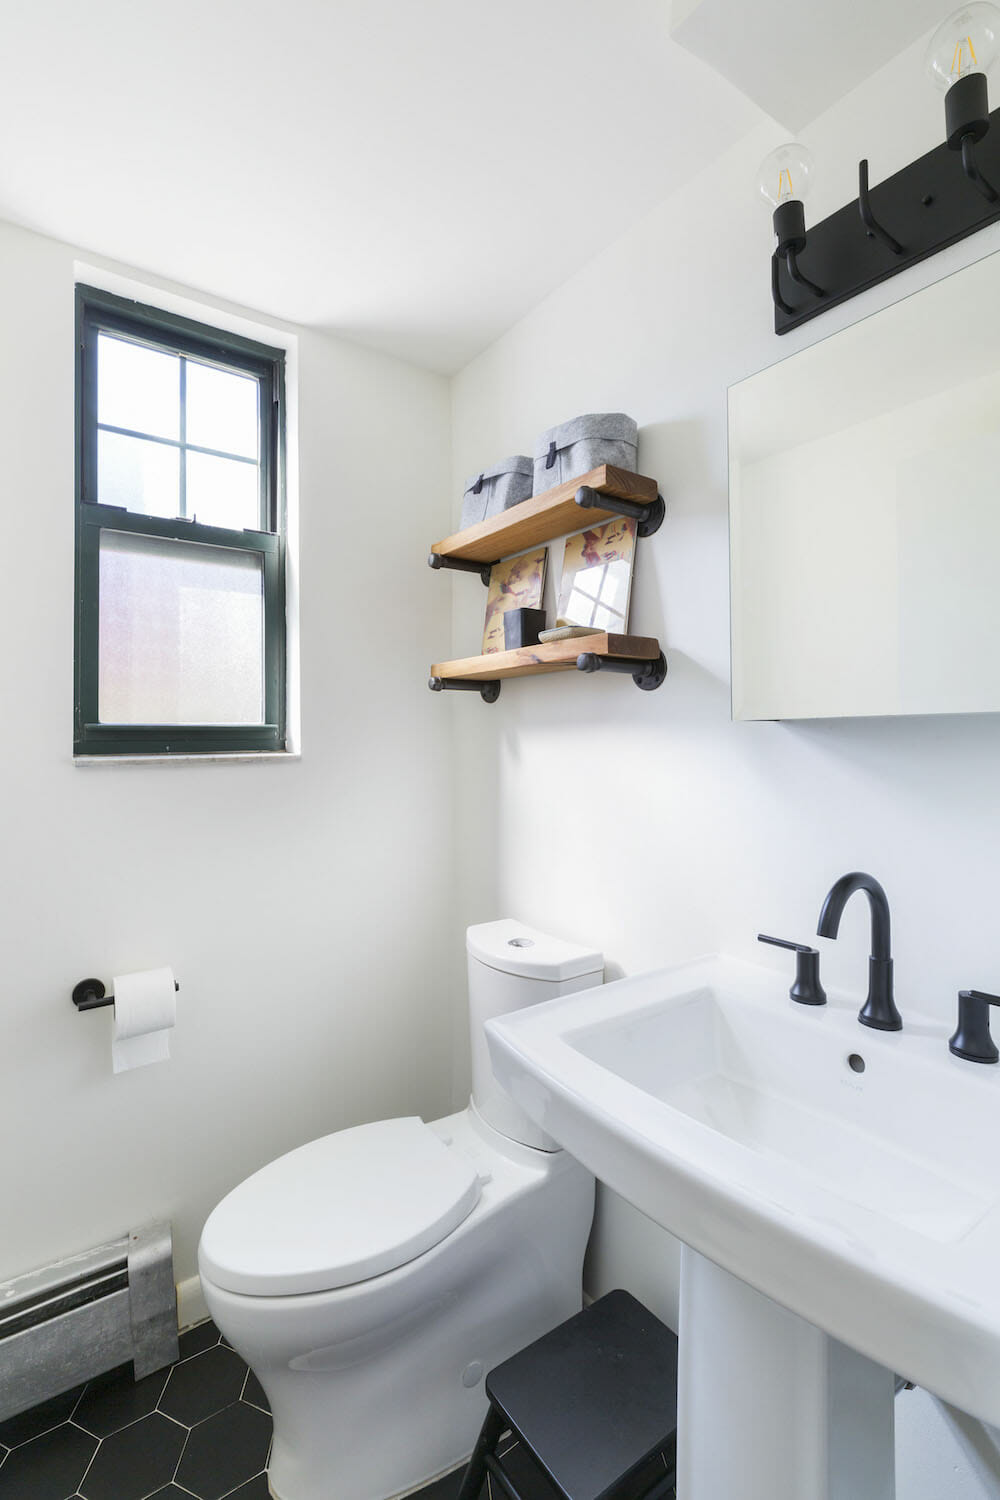 pedastal sink with black faucet and fixtures and wooden shelves above toilet and black hexagon floor tiles and medicine cabinet with mirror after renovation